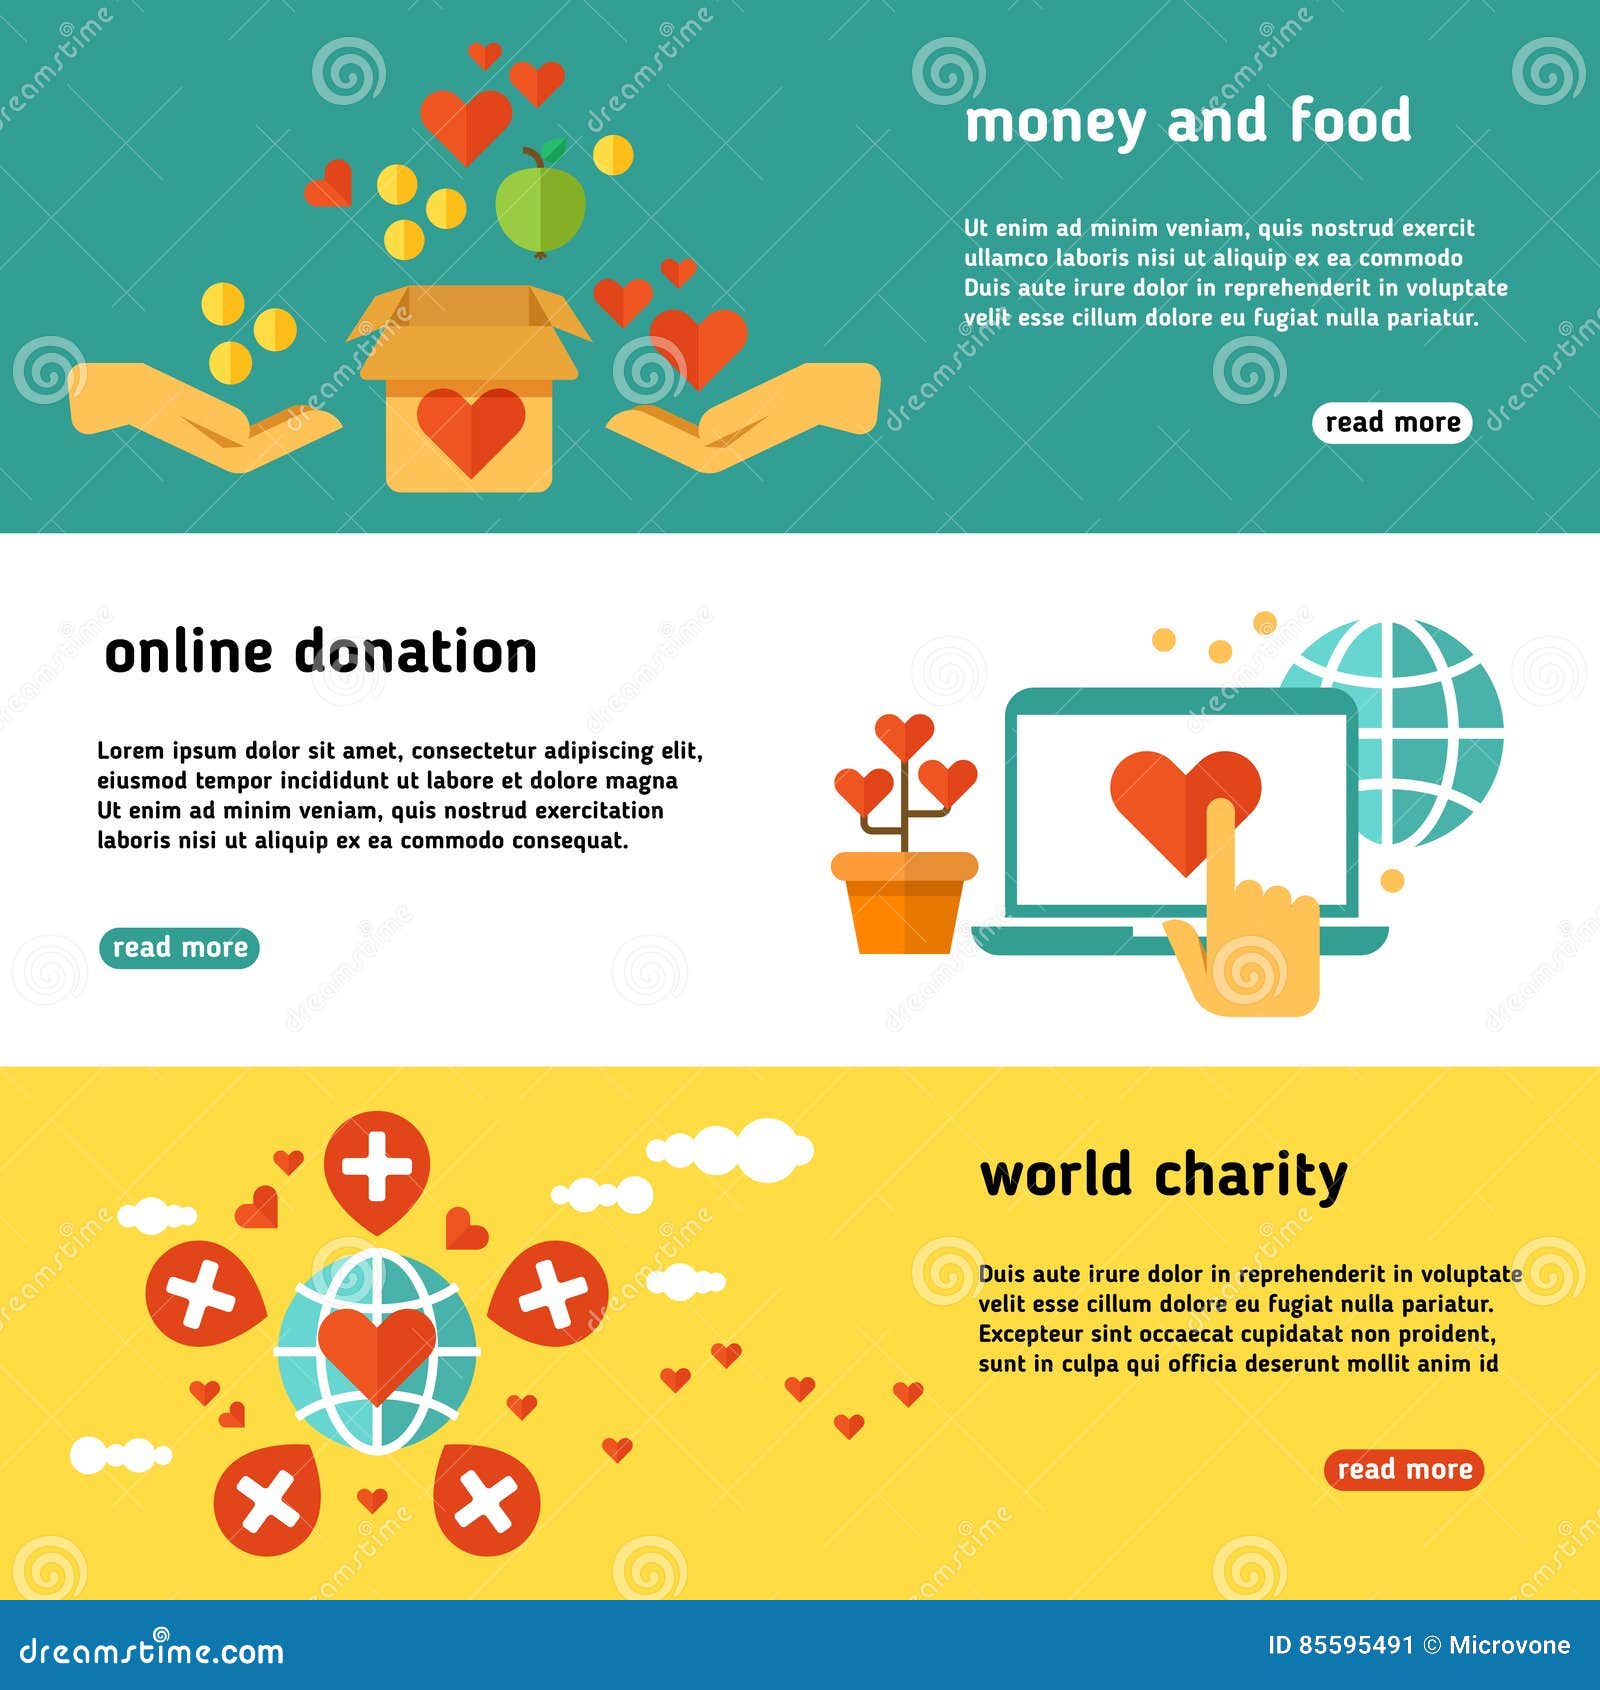 nonprofit, charity, philanthropy, donate, giving donation, social help  banners set